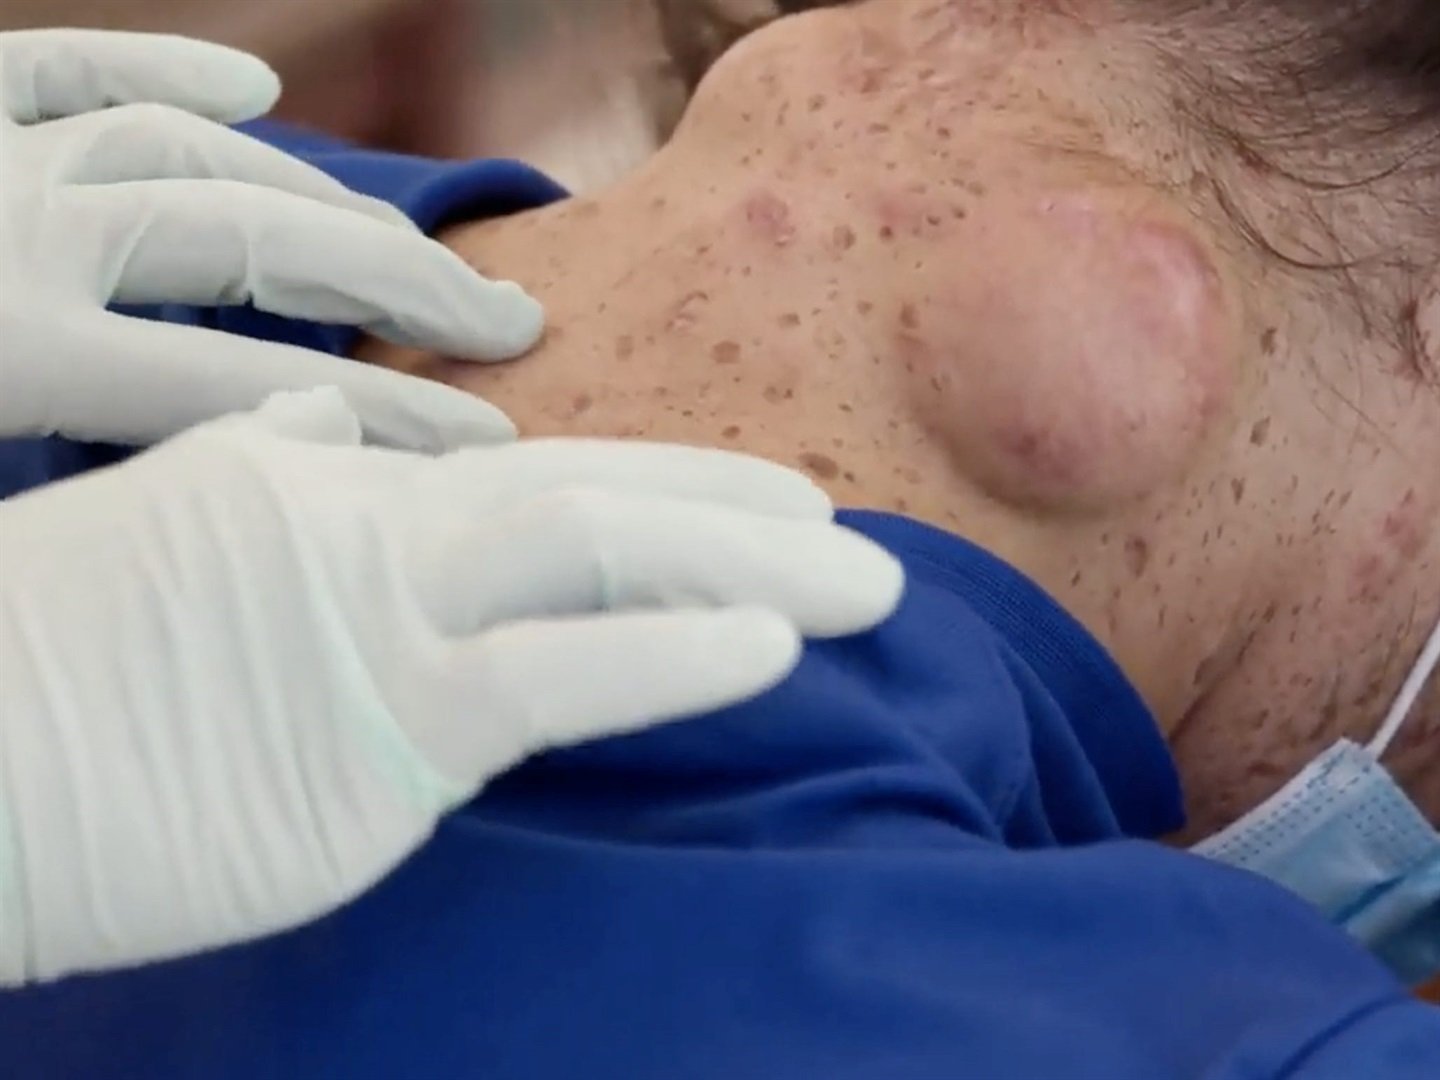 Dr Pimple Popper squeezed man's 3 swollen 'mashed potato' neck cysts to